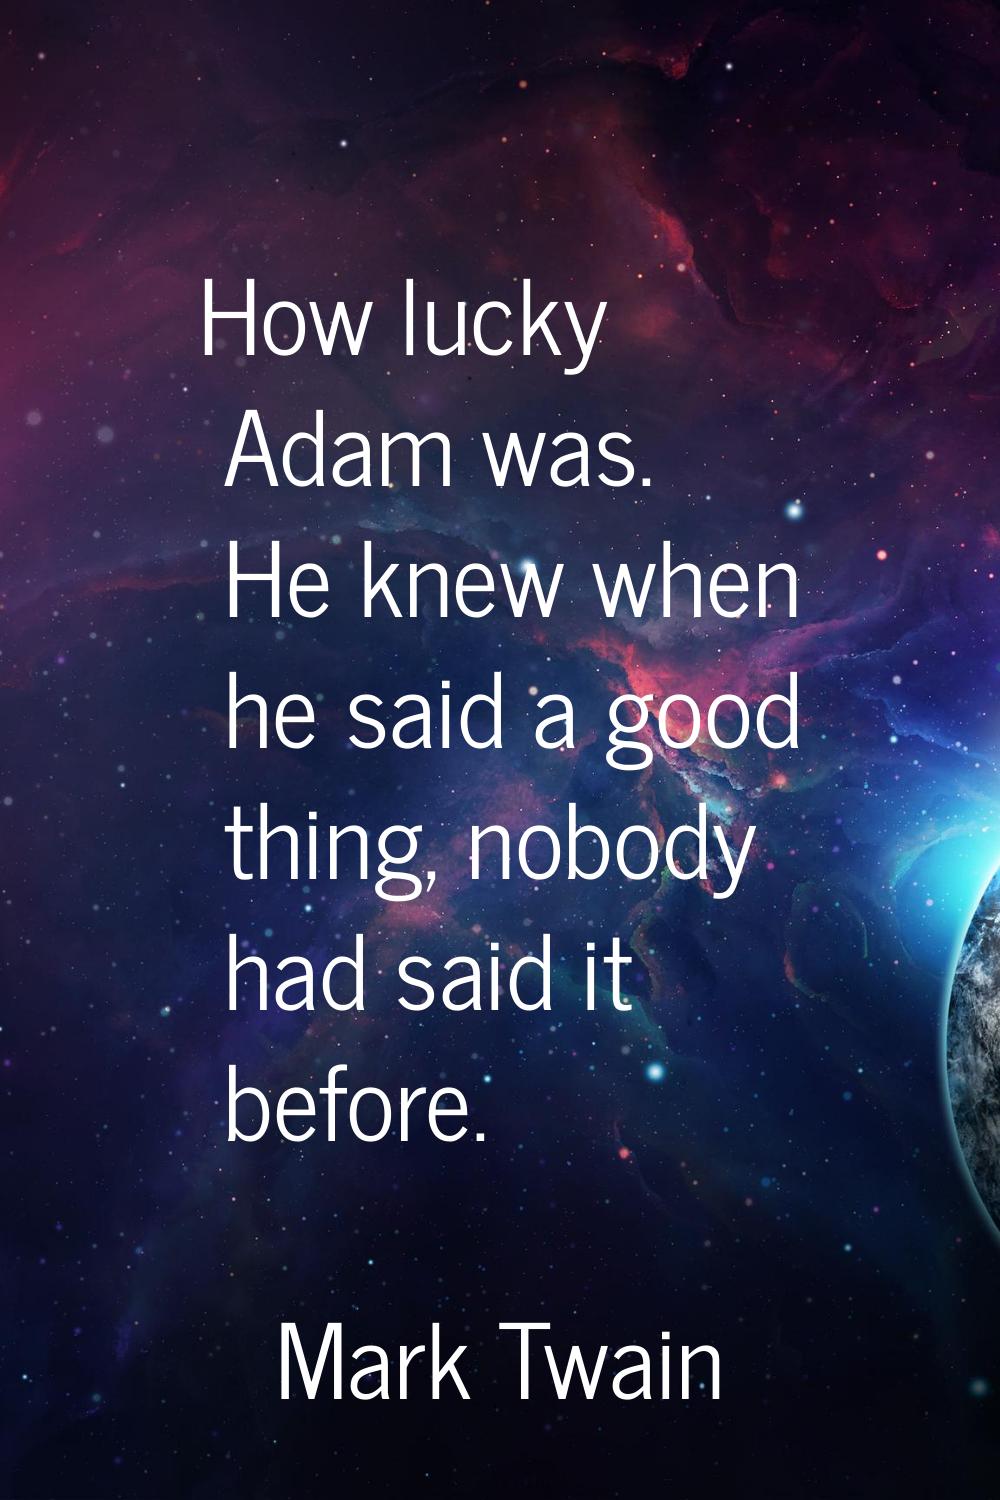 How lucky Adam was. He knew when he said a good thing, nobody had said it before.